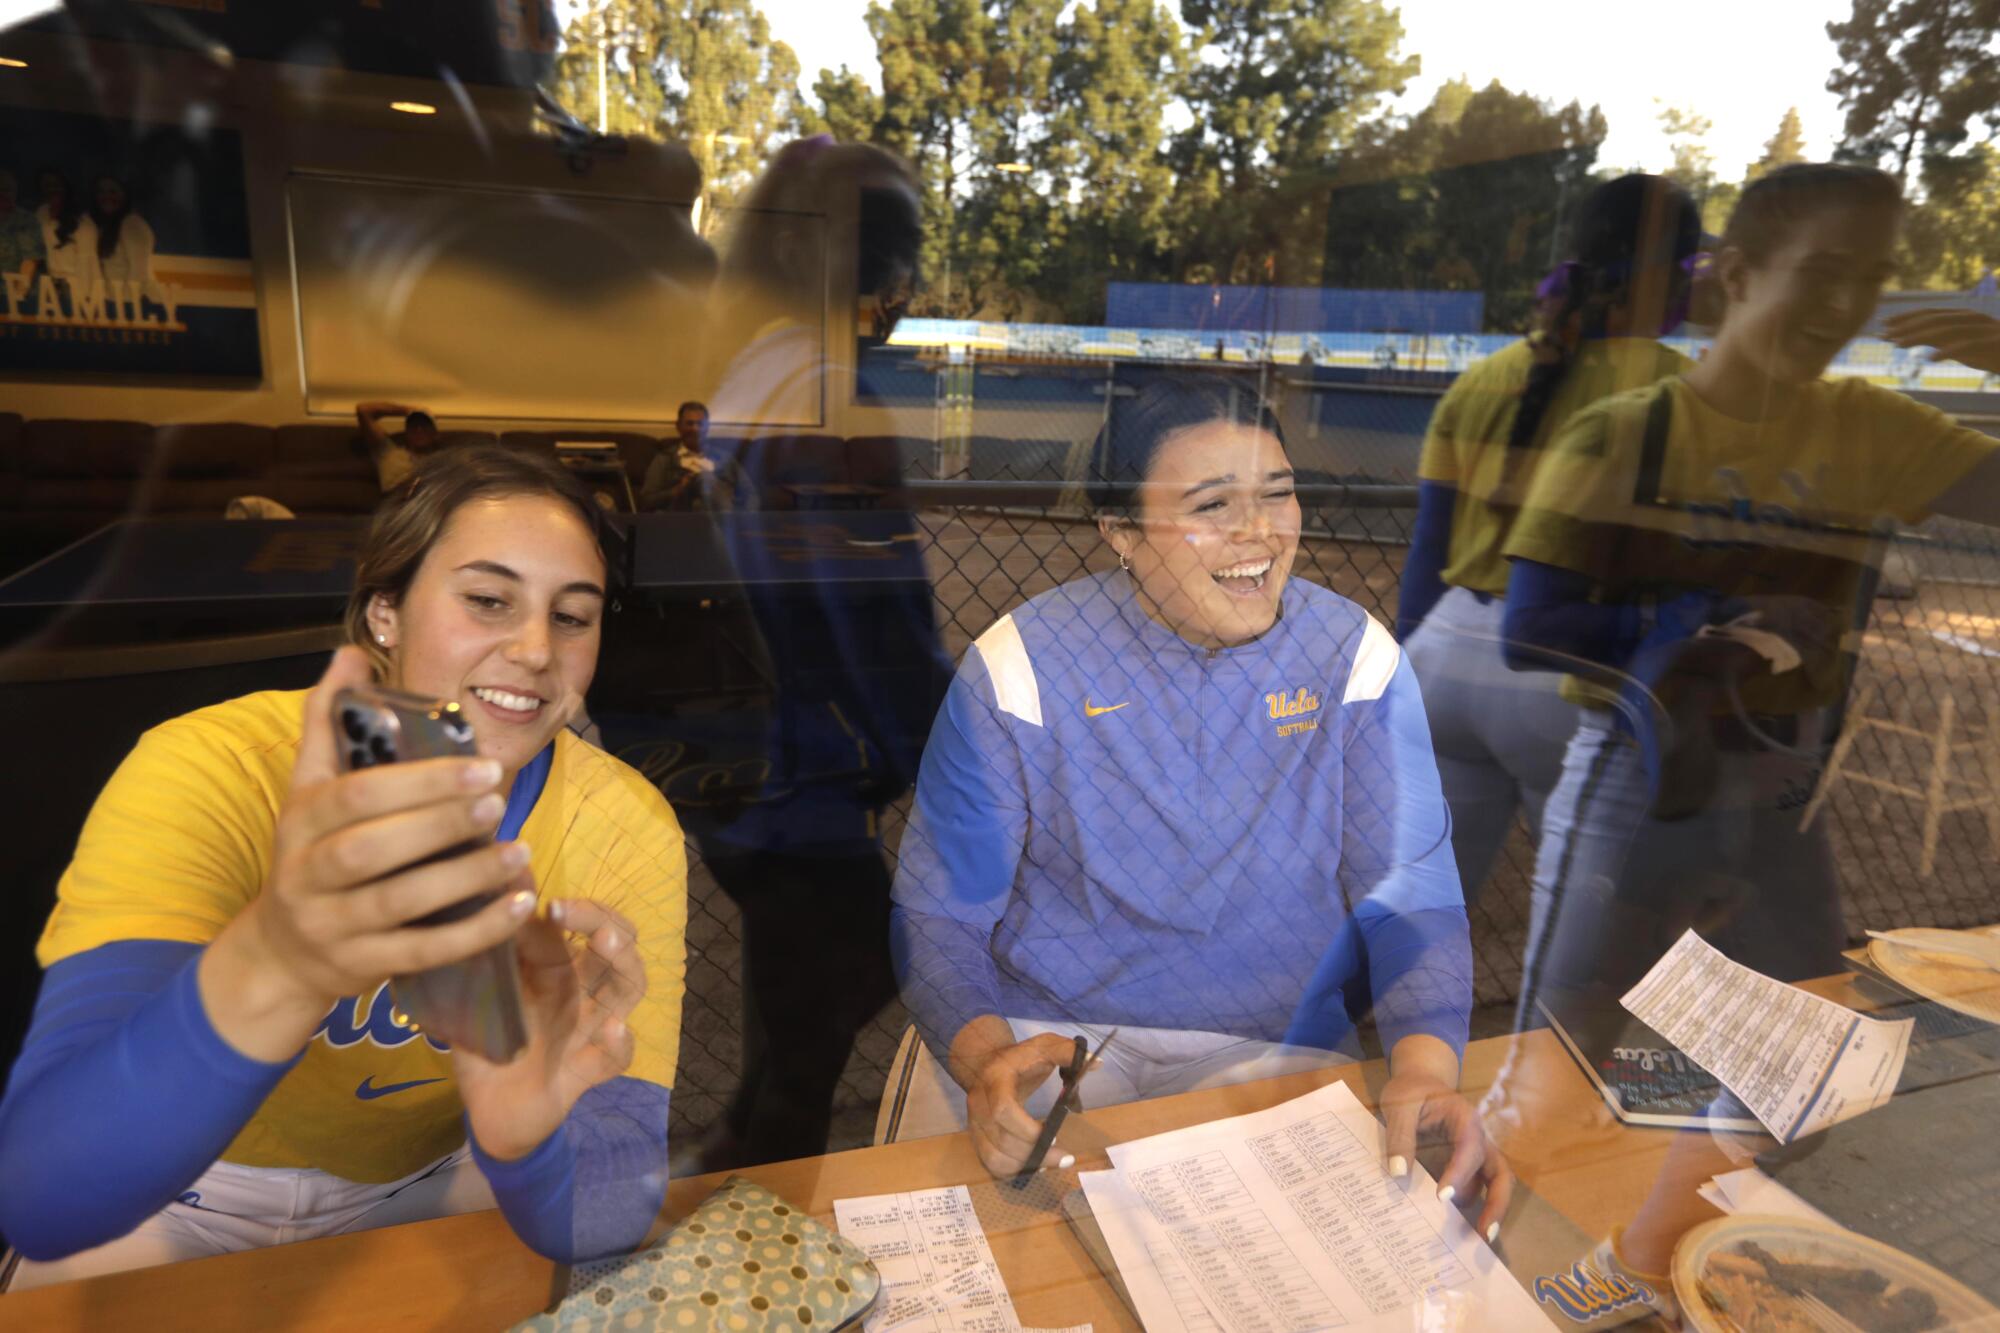 UCLA bullpen catchers Sara Rusconi Vicinanza, left, and Taylor Sullivan laugh while looking at scouting reports